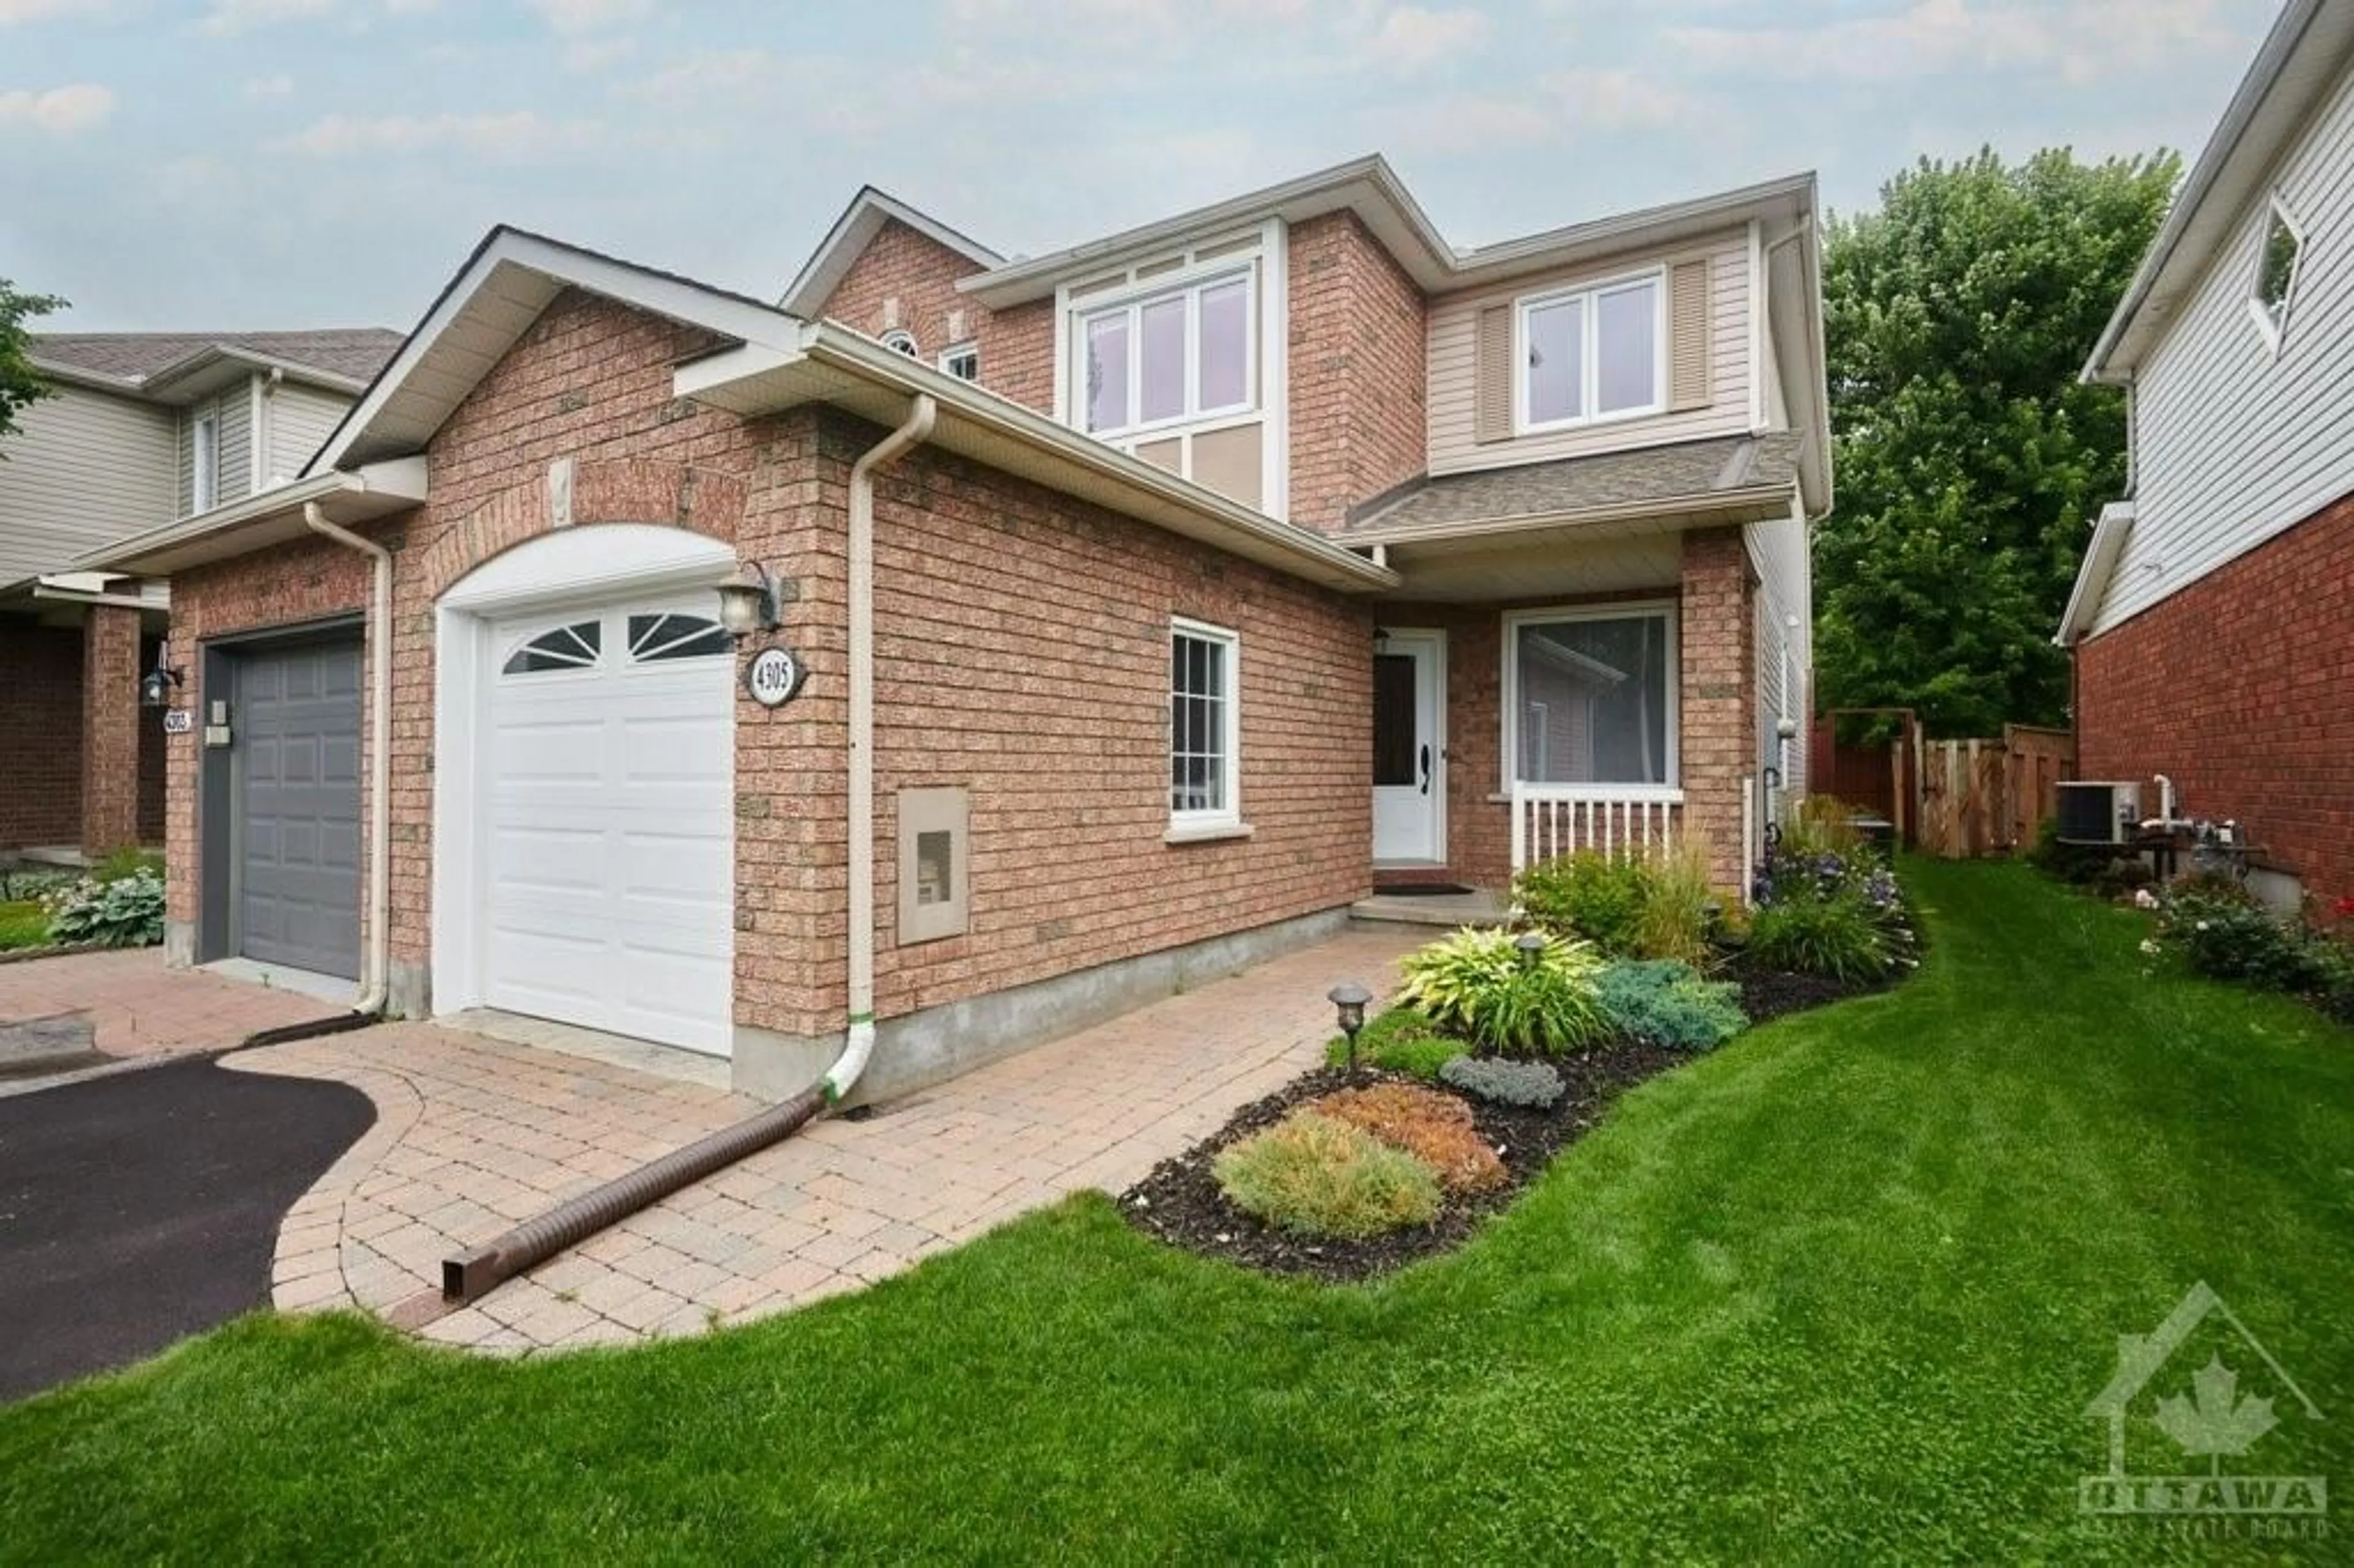 Home with brick exterior material for 4305 OWL VALLEY Dr, Ottawa Ontario K1V 1L8